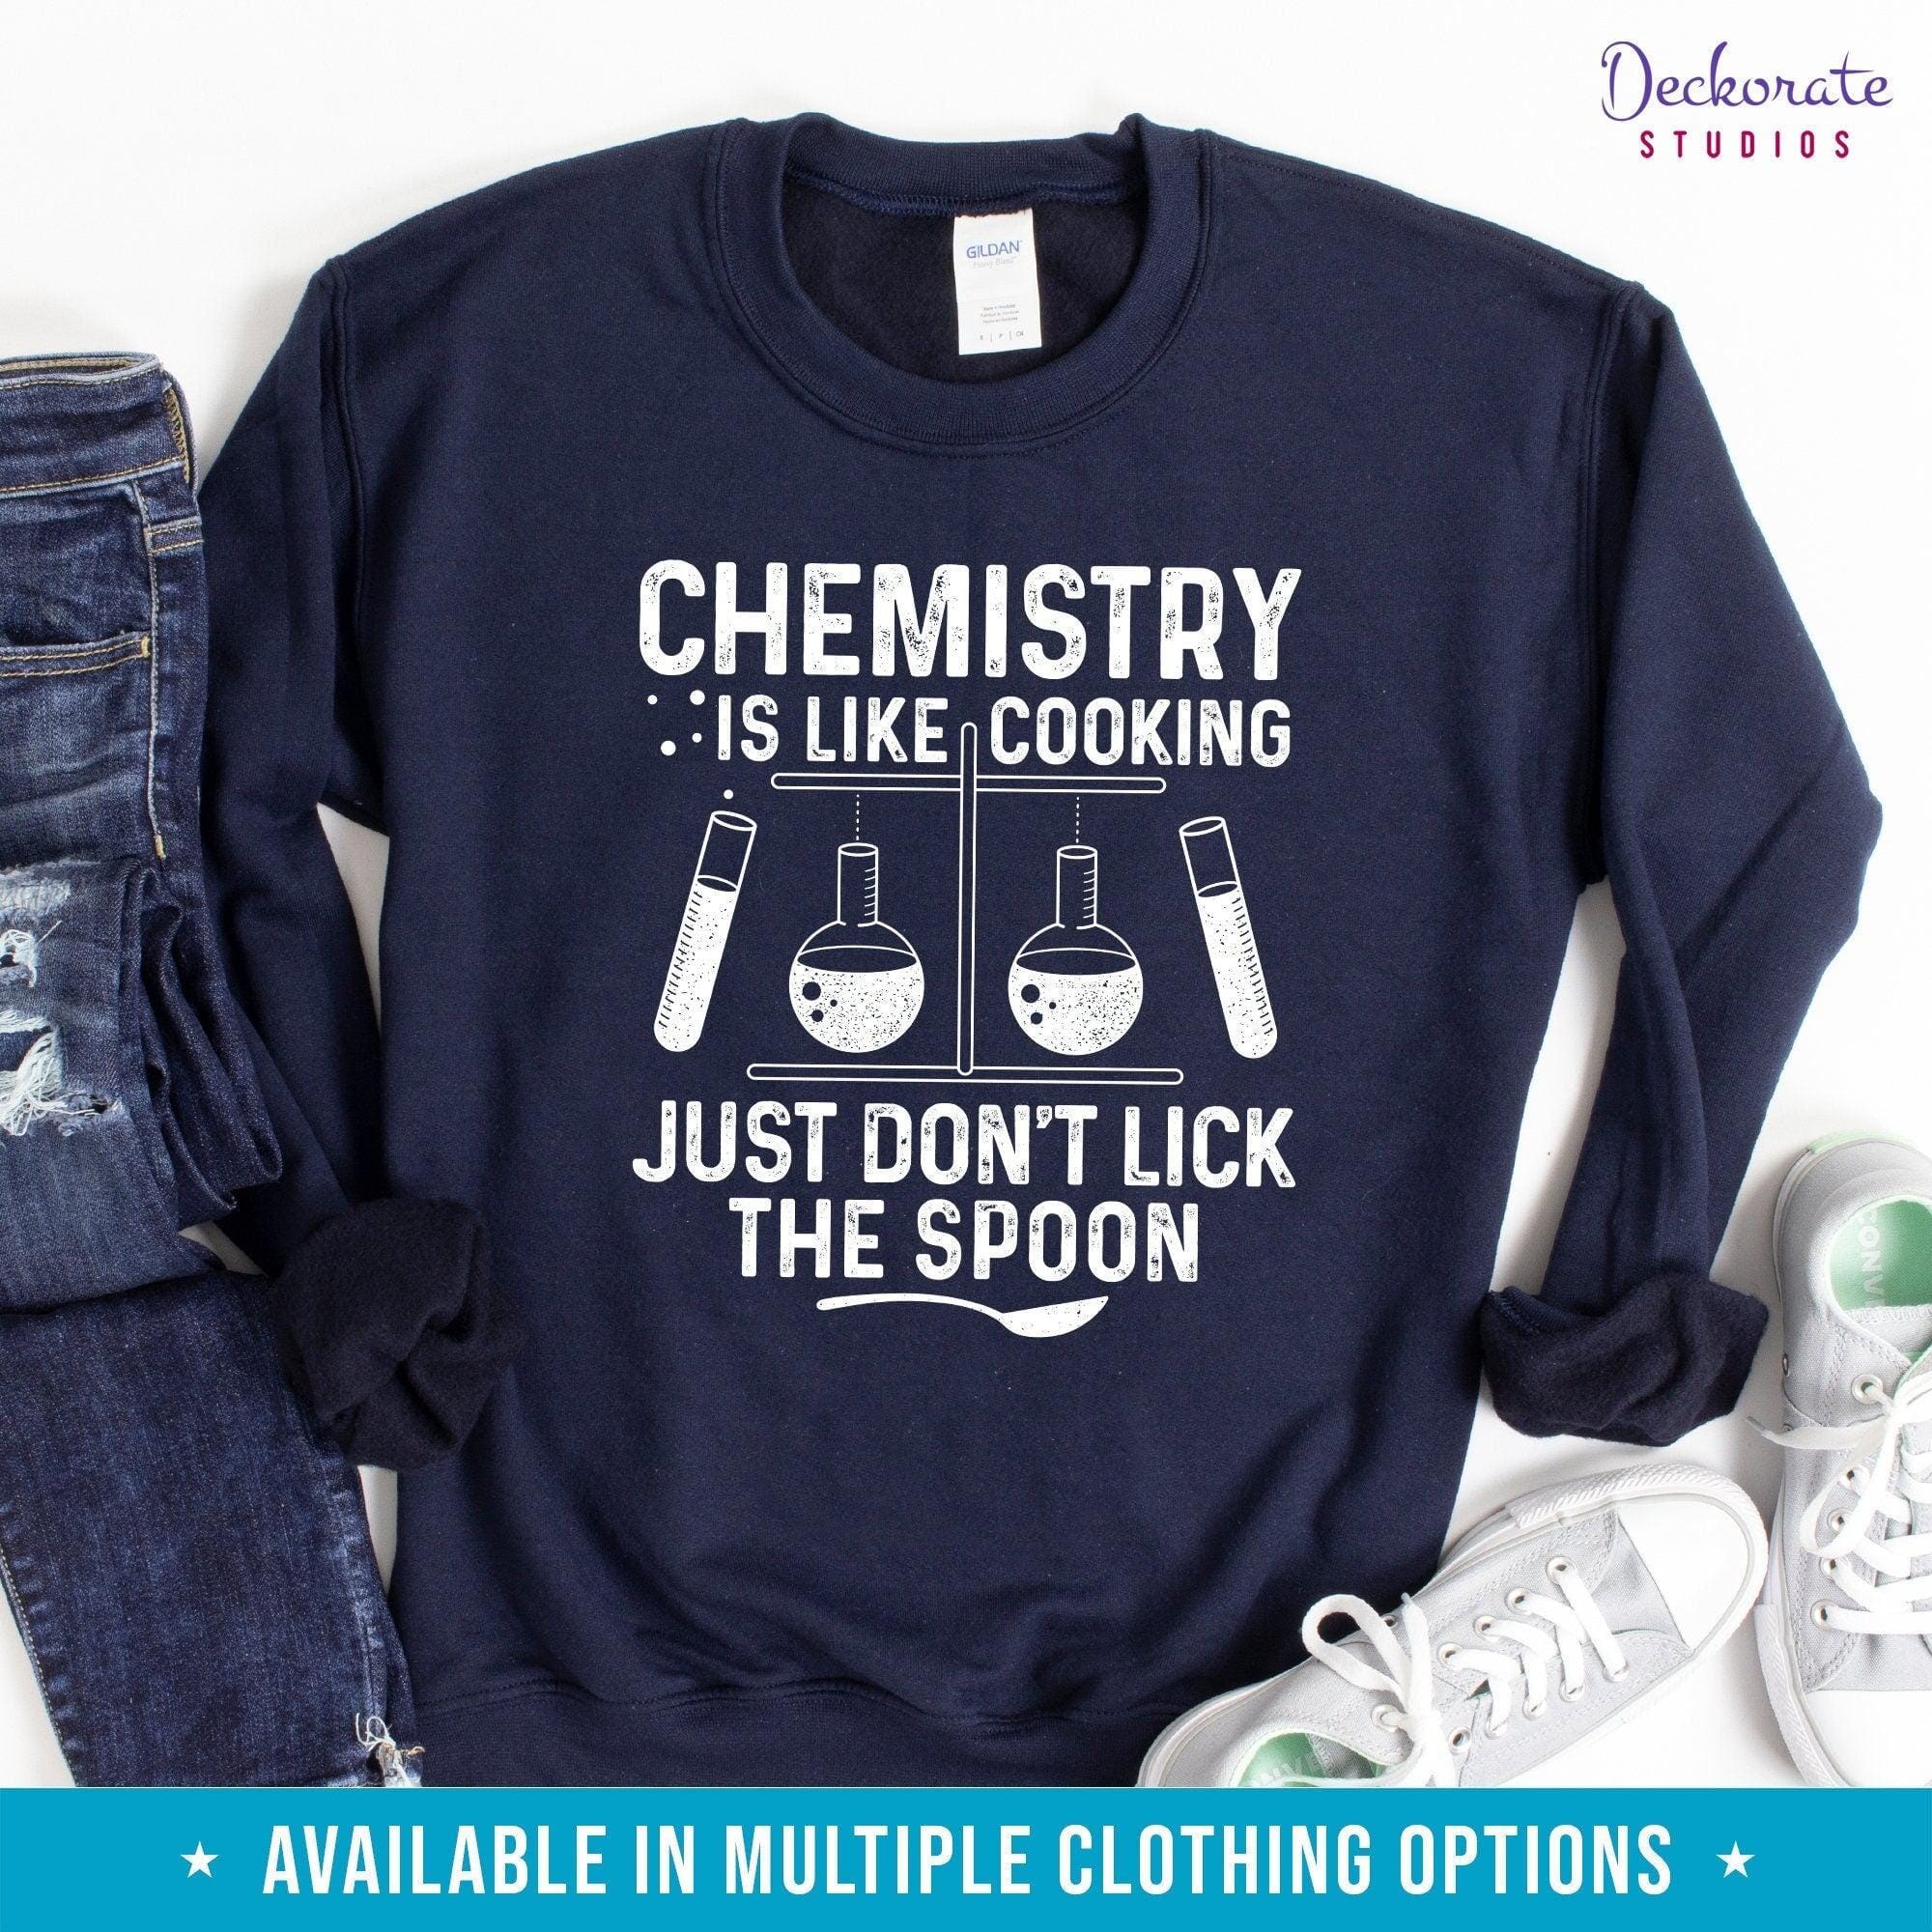 Chemistry Shirt, Gift for Science Teacher, Chemical Engineering Student Gift-Clothing:Gender-Neutral Adult Clothing:Tops & Tees:T-shirts:Graphic Tees-DecksyDesigns